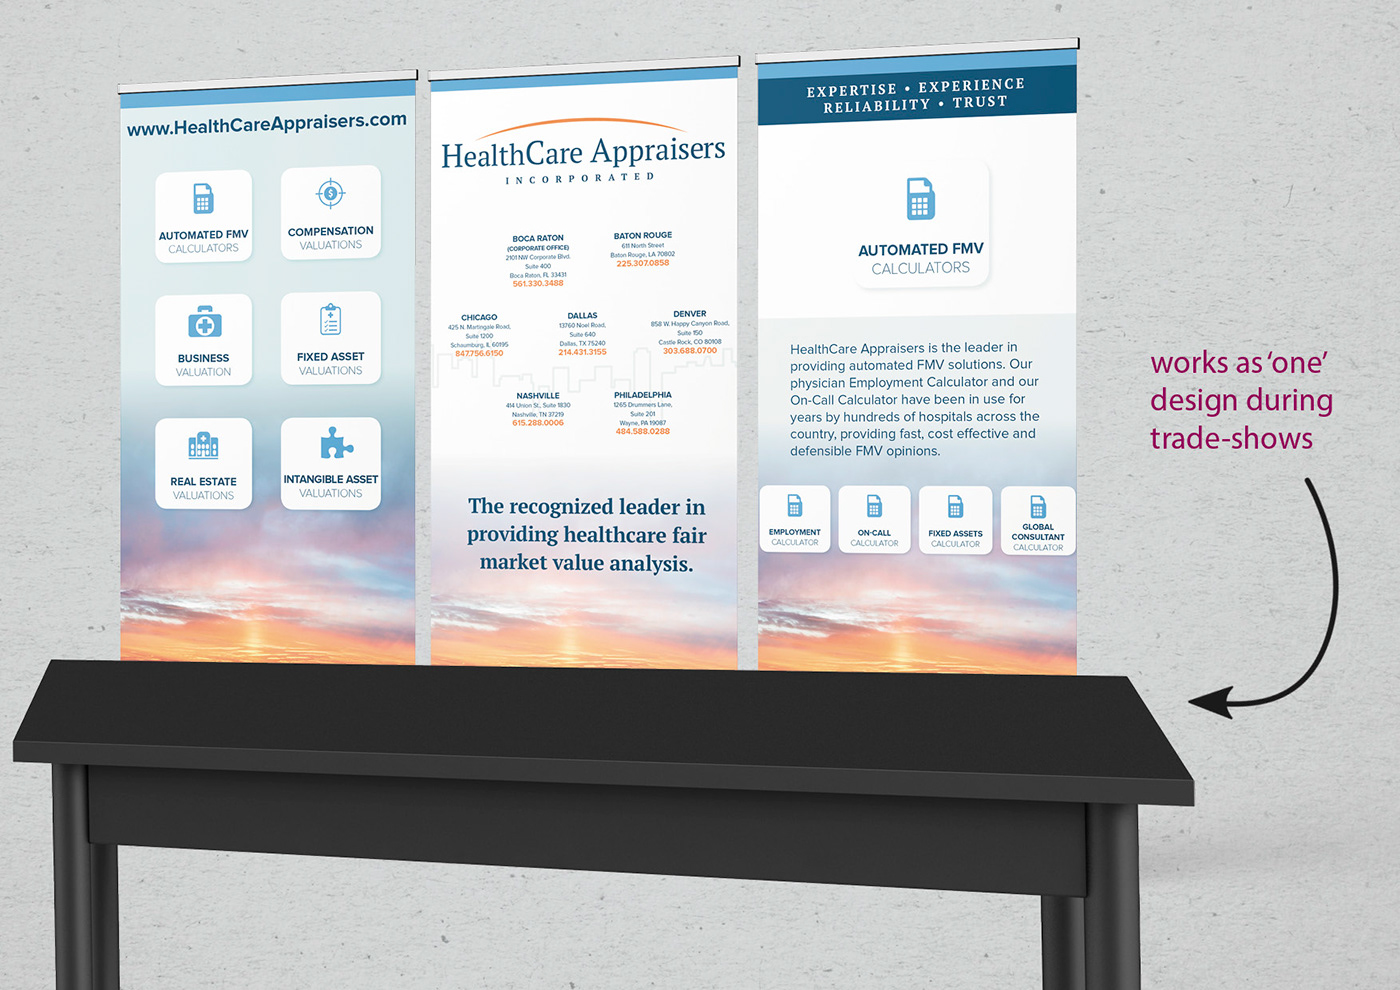 stand up pull up banners to use at a booth at conferences, tradeshows to advertise their company